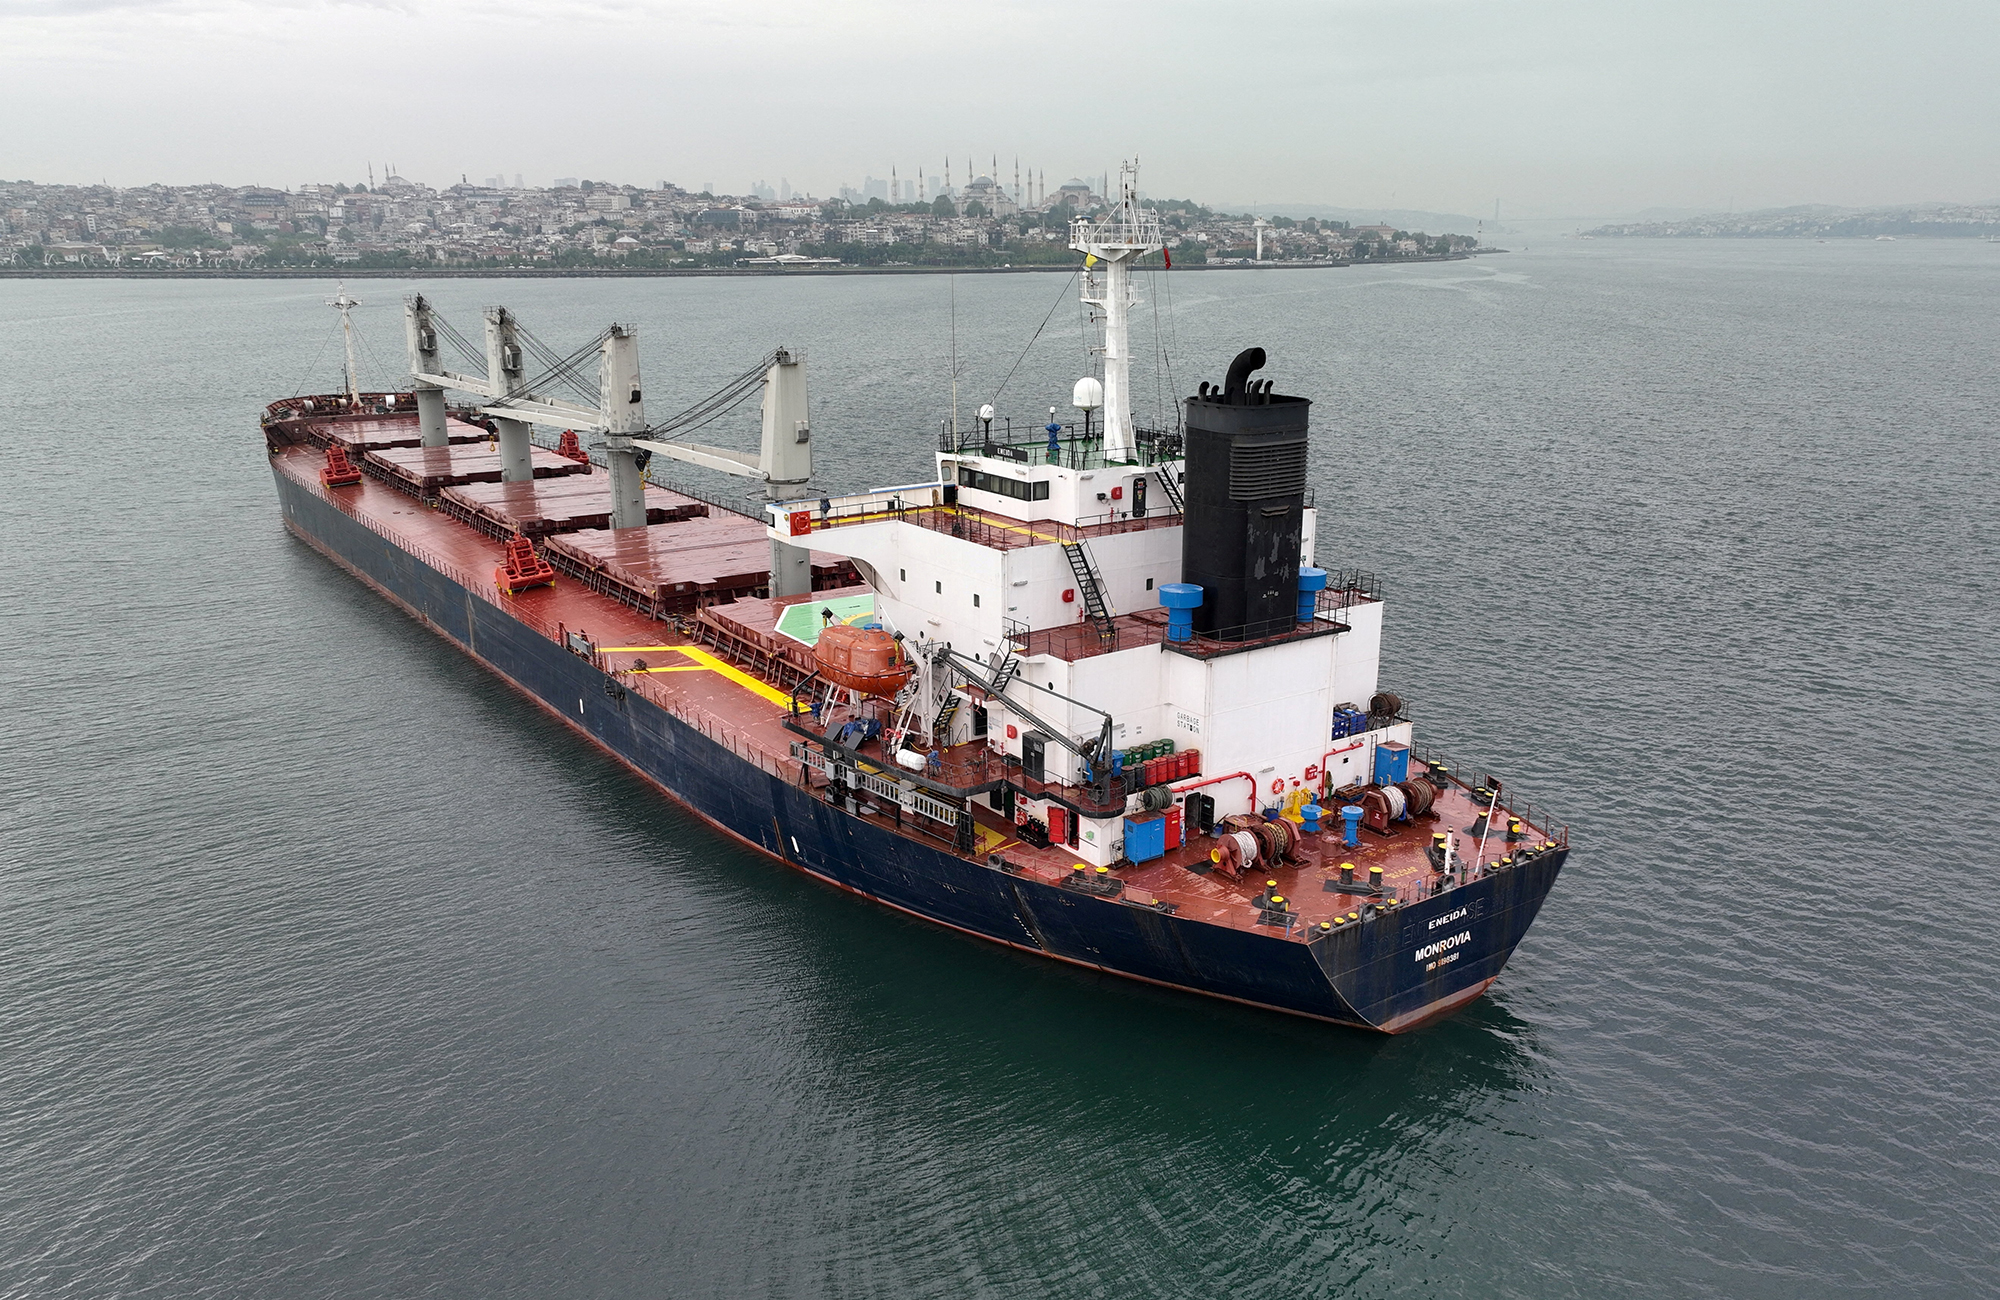 Liberia-flagged bulker Eneida, carrying grain under UN's Black Sea grain initiative, waits for inspection in the southern anchorage of Istanbul, Turkey, on May 17, 2023.